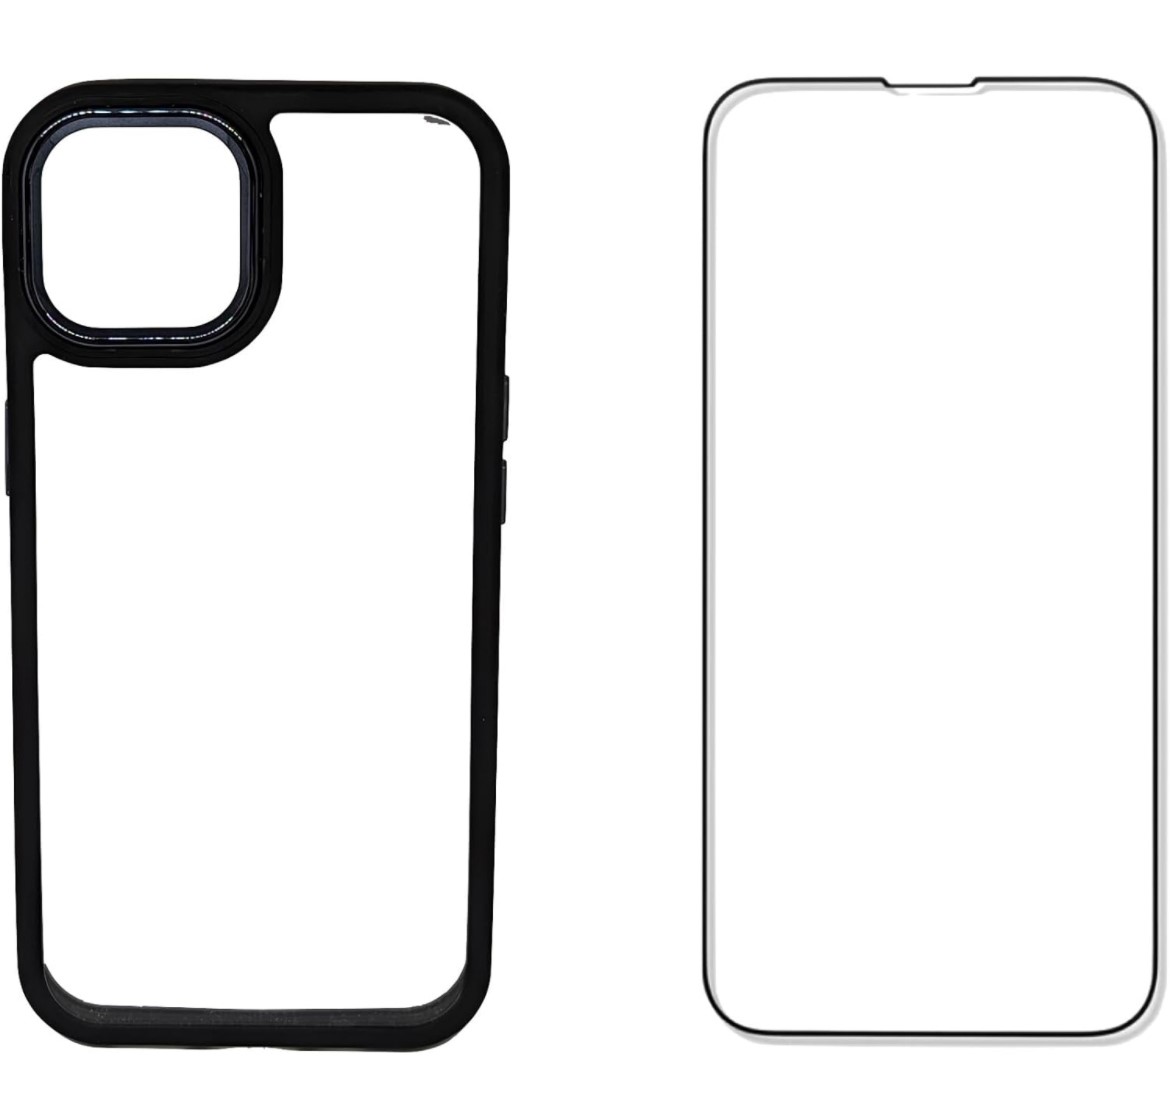 Set Of 10 X Black iPhone 15 Covers With Glass ScreensÊ - Image 3 of 3